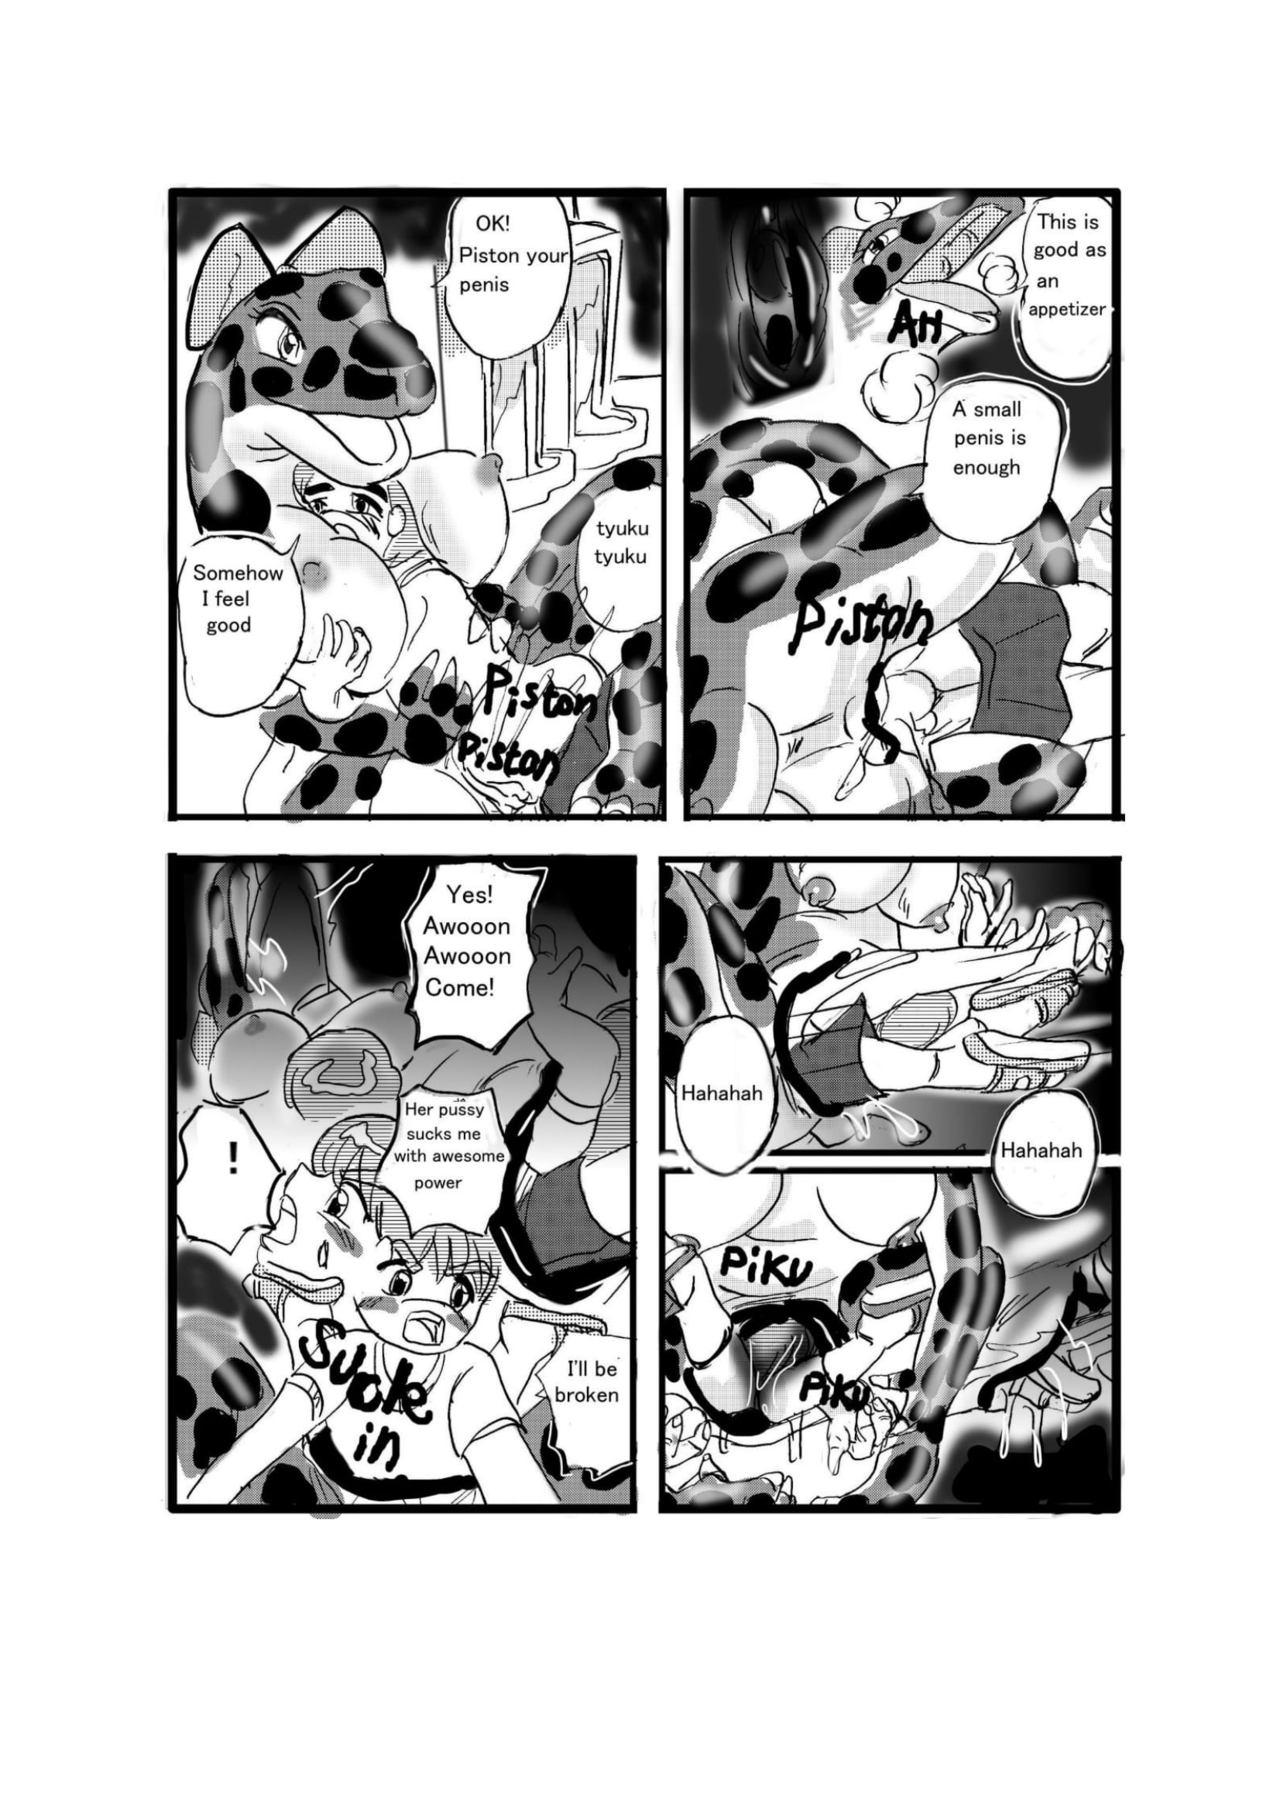 Anal Porn Swallowed Whole vol.2 Waniko + What's Digestion? - Original 4some - Page 5